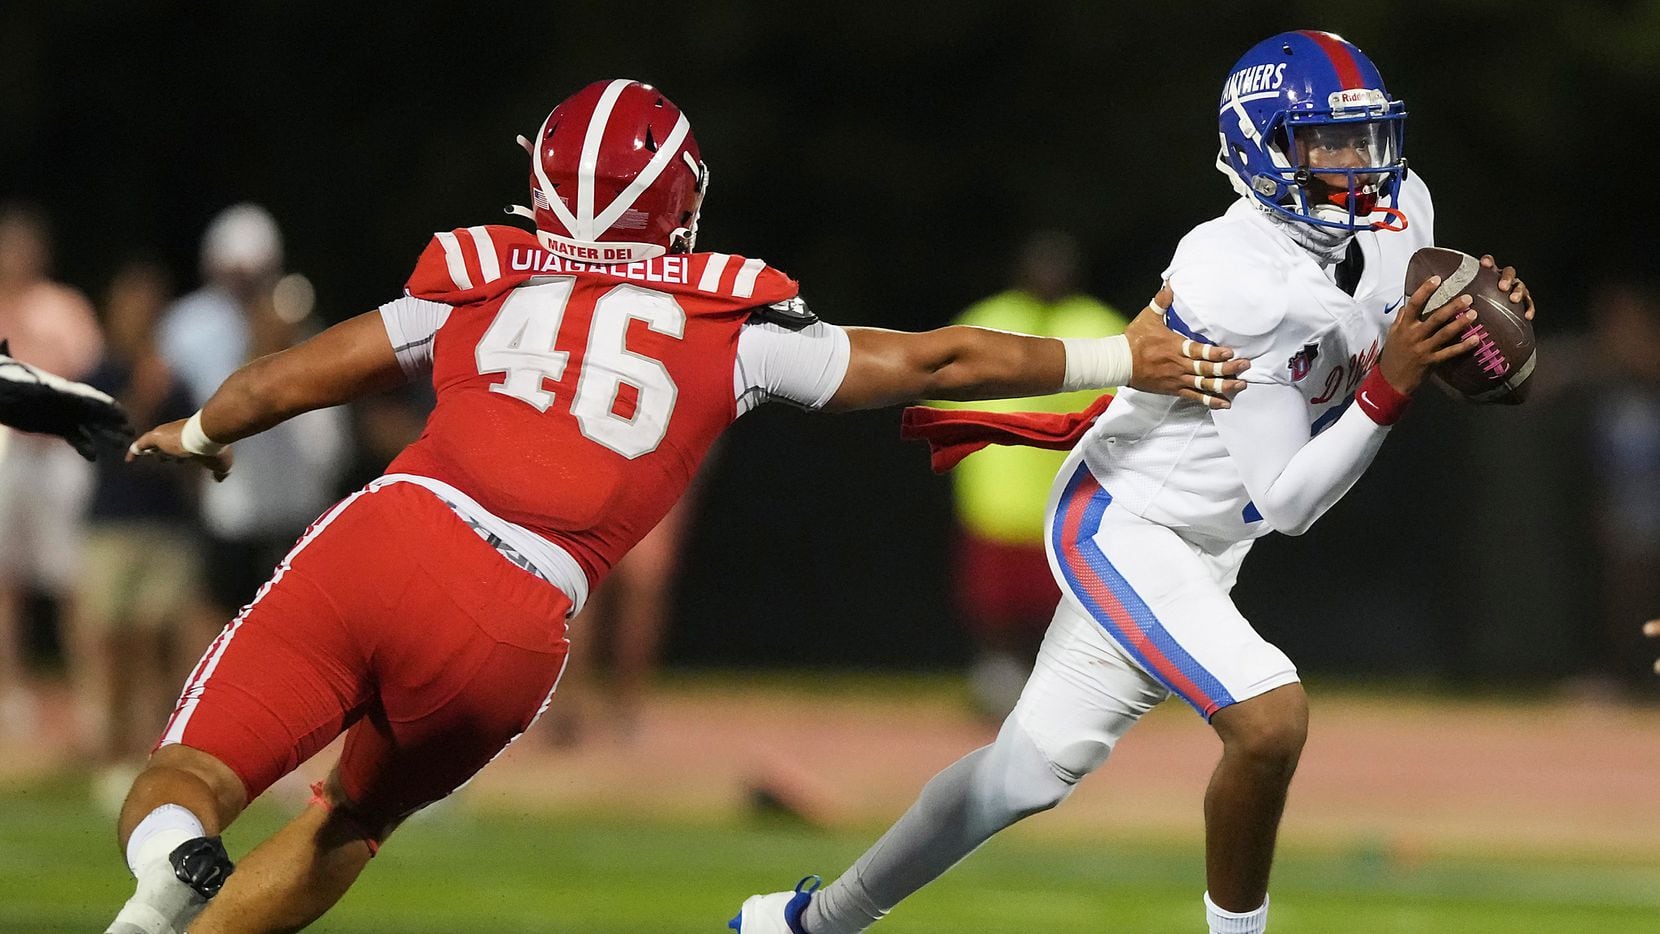 Duncanville quarterback Solomon James (3) slips away from Mater Dei defensive lineman Ta'i Ta'i Uiagalelei (46) during the first half of a high school football game on Friday, Aug. 27, 2021, in Duncanville.